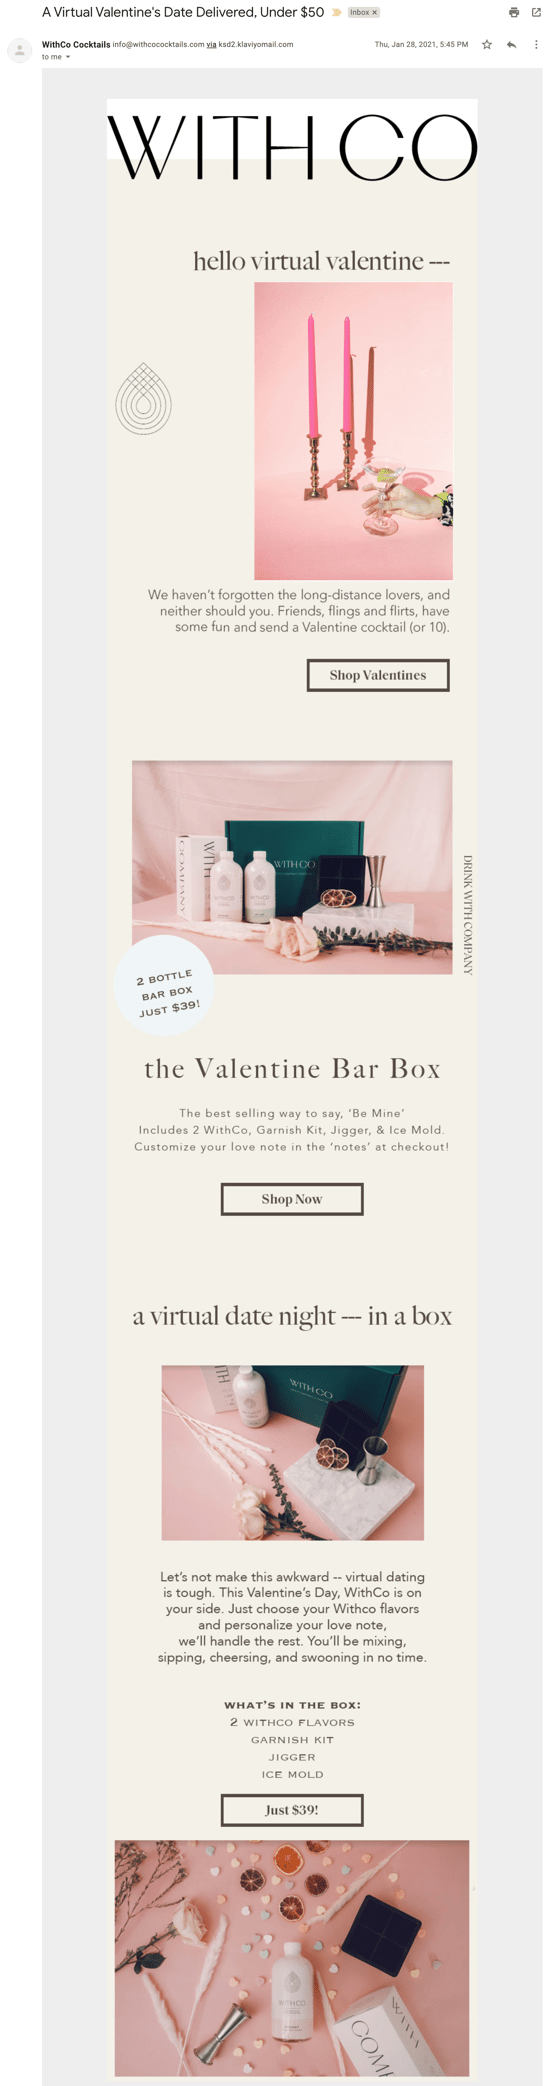 WithCo-valentines-day-email